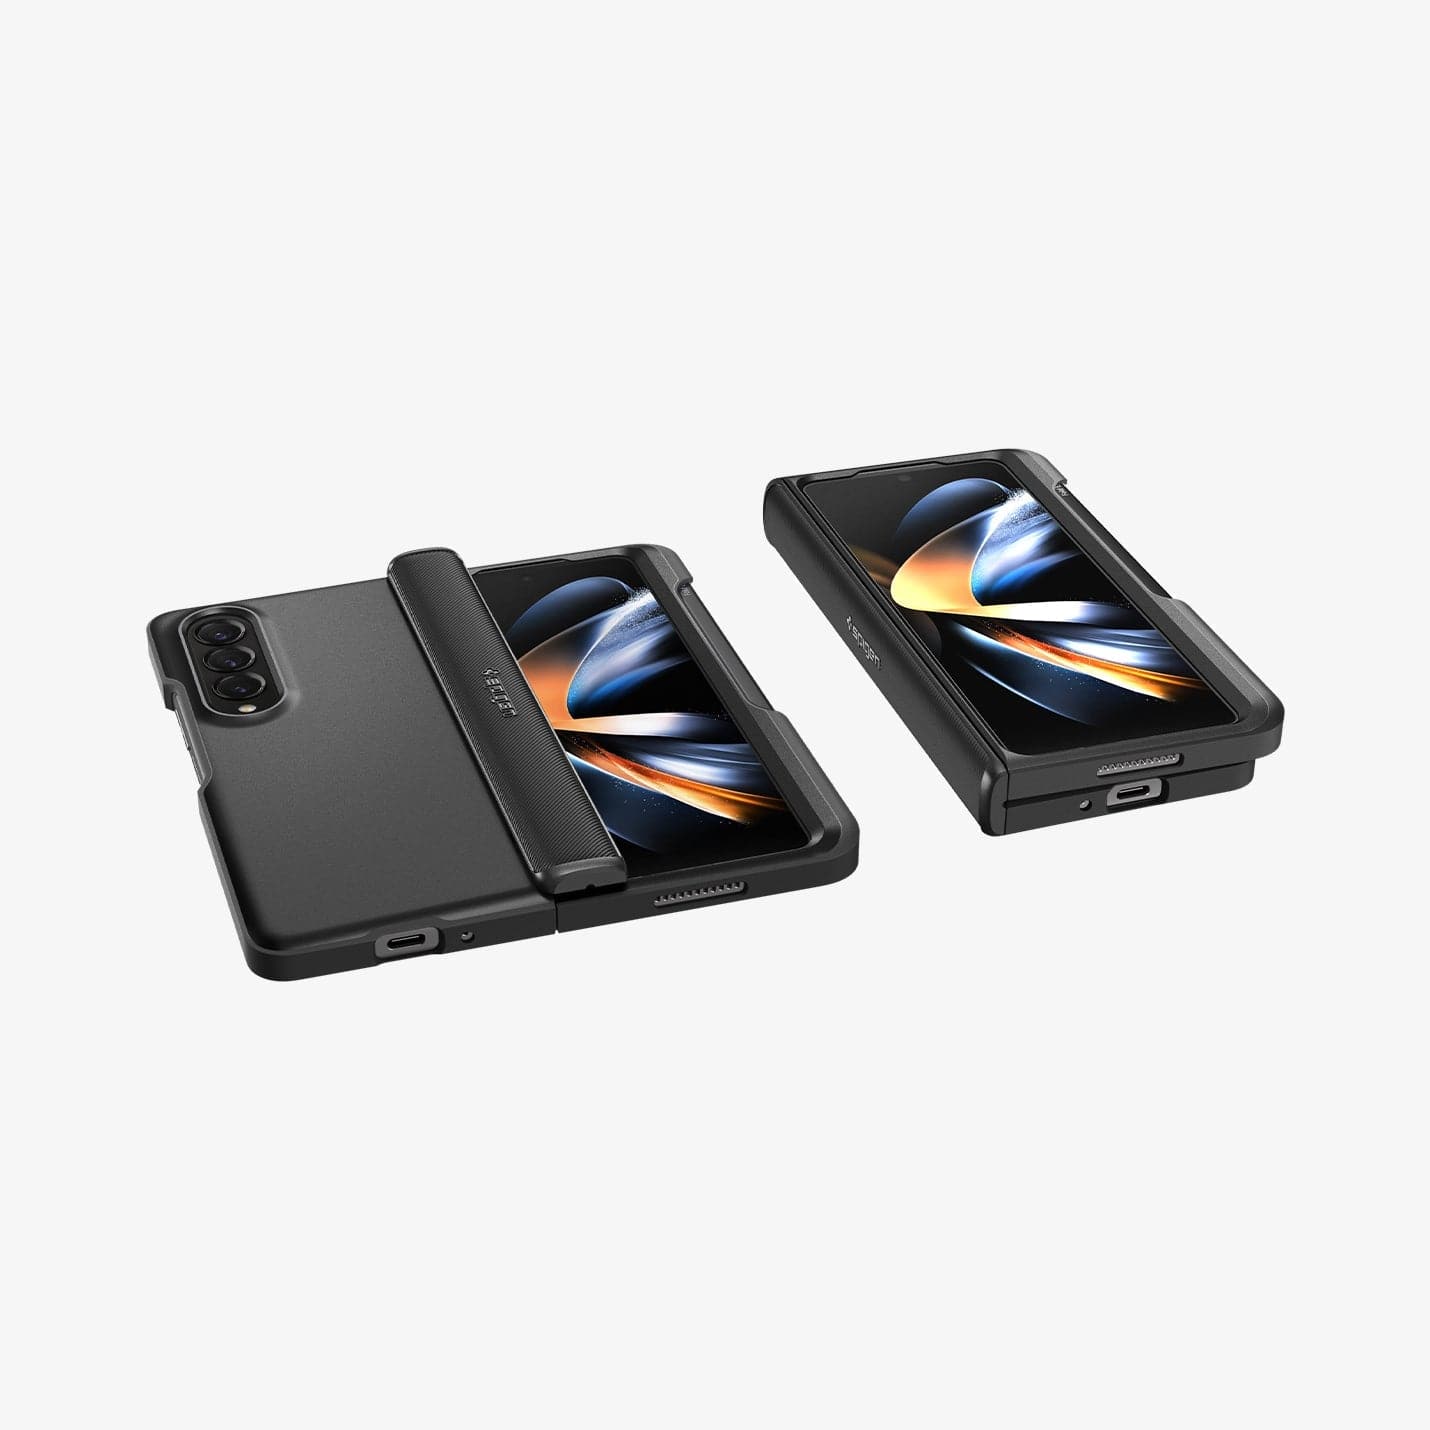 ACS05186 - Galaxy Z Fold 4 Case Slim Armor Pro Pen Edition in black showing the back and front of one device and the front with device folded